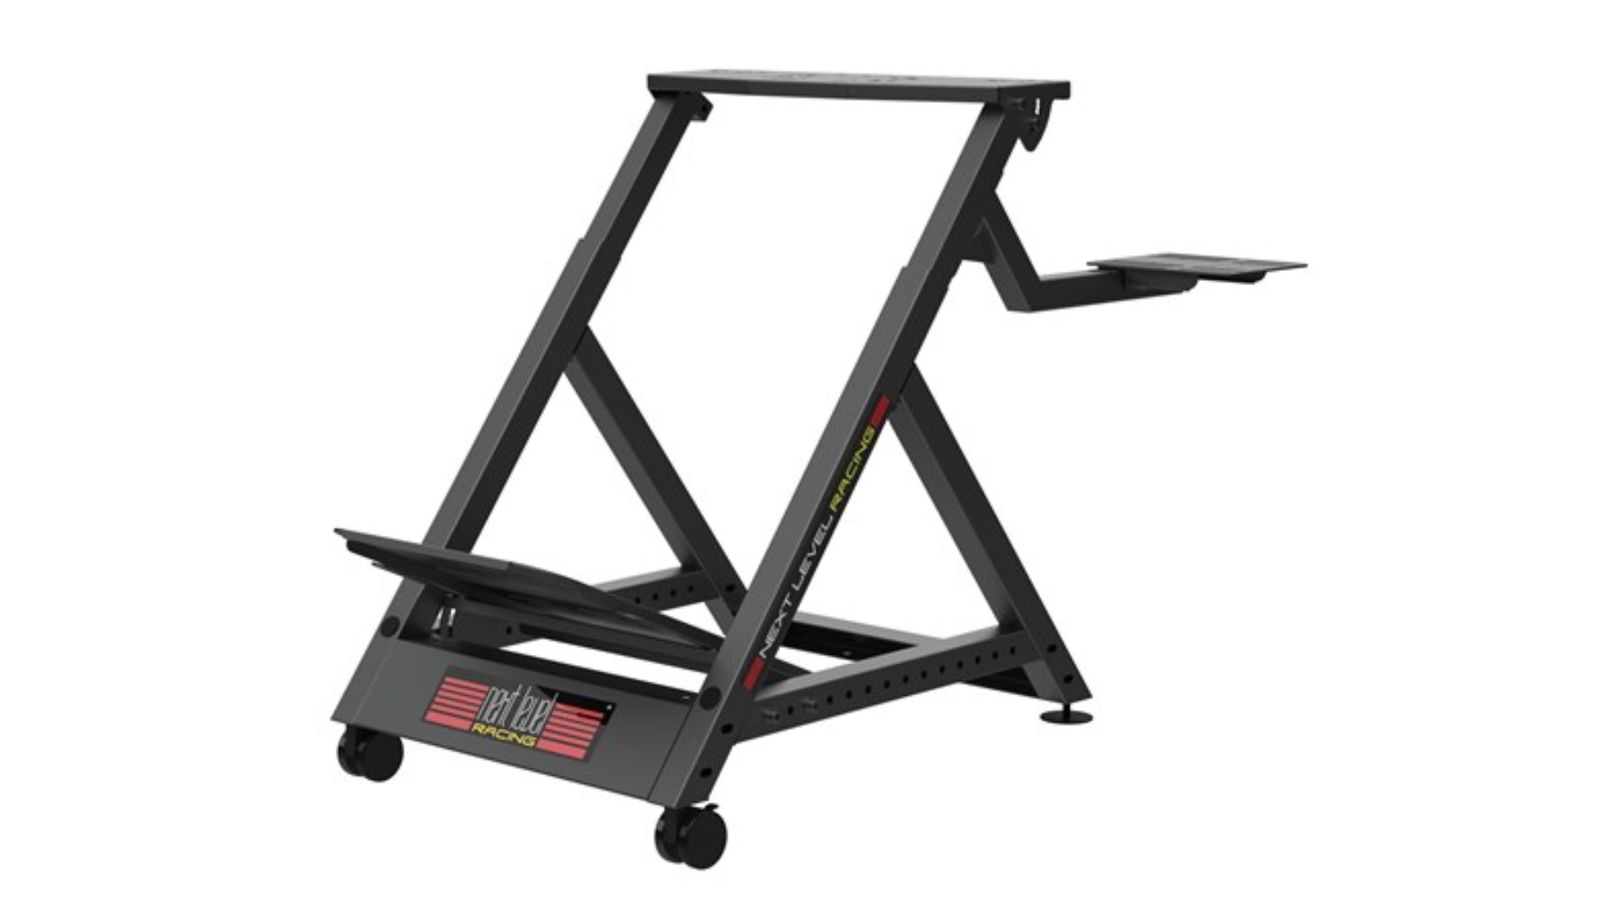 Next Level Racing Wheel Stand DD product image of a black stand featuring red details.